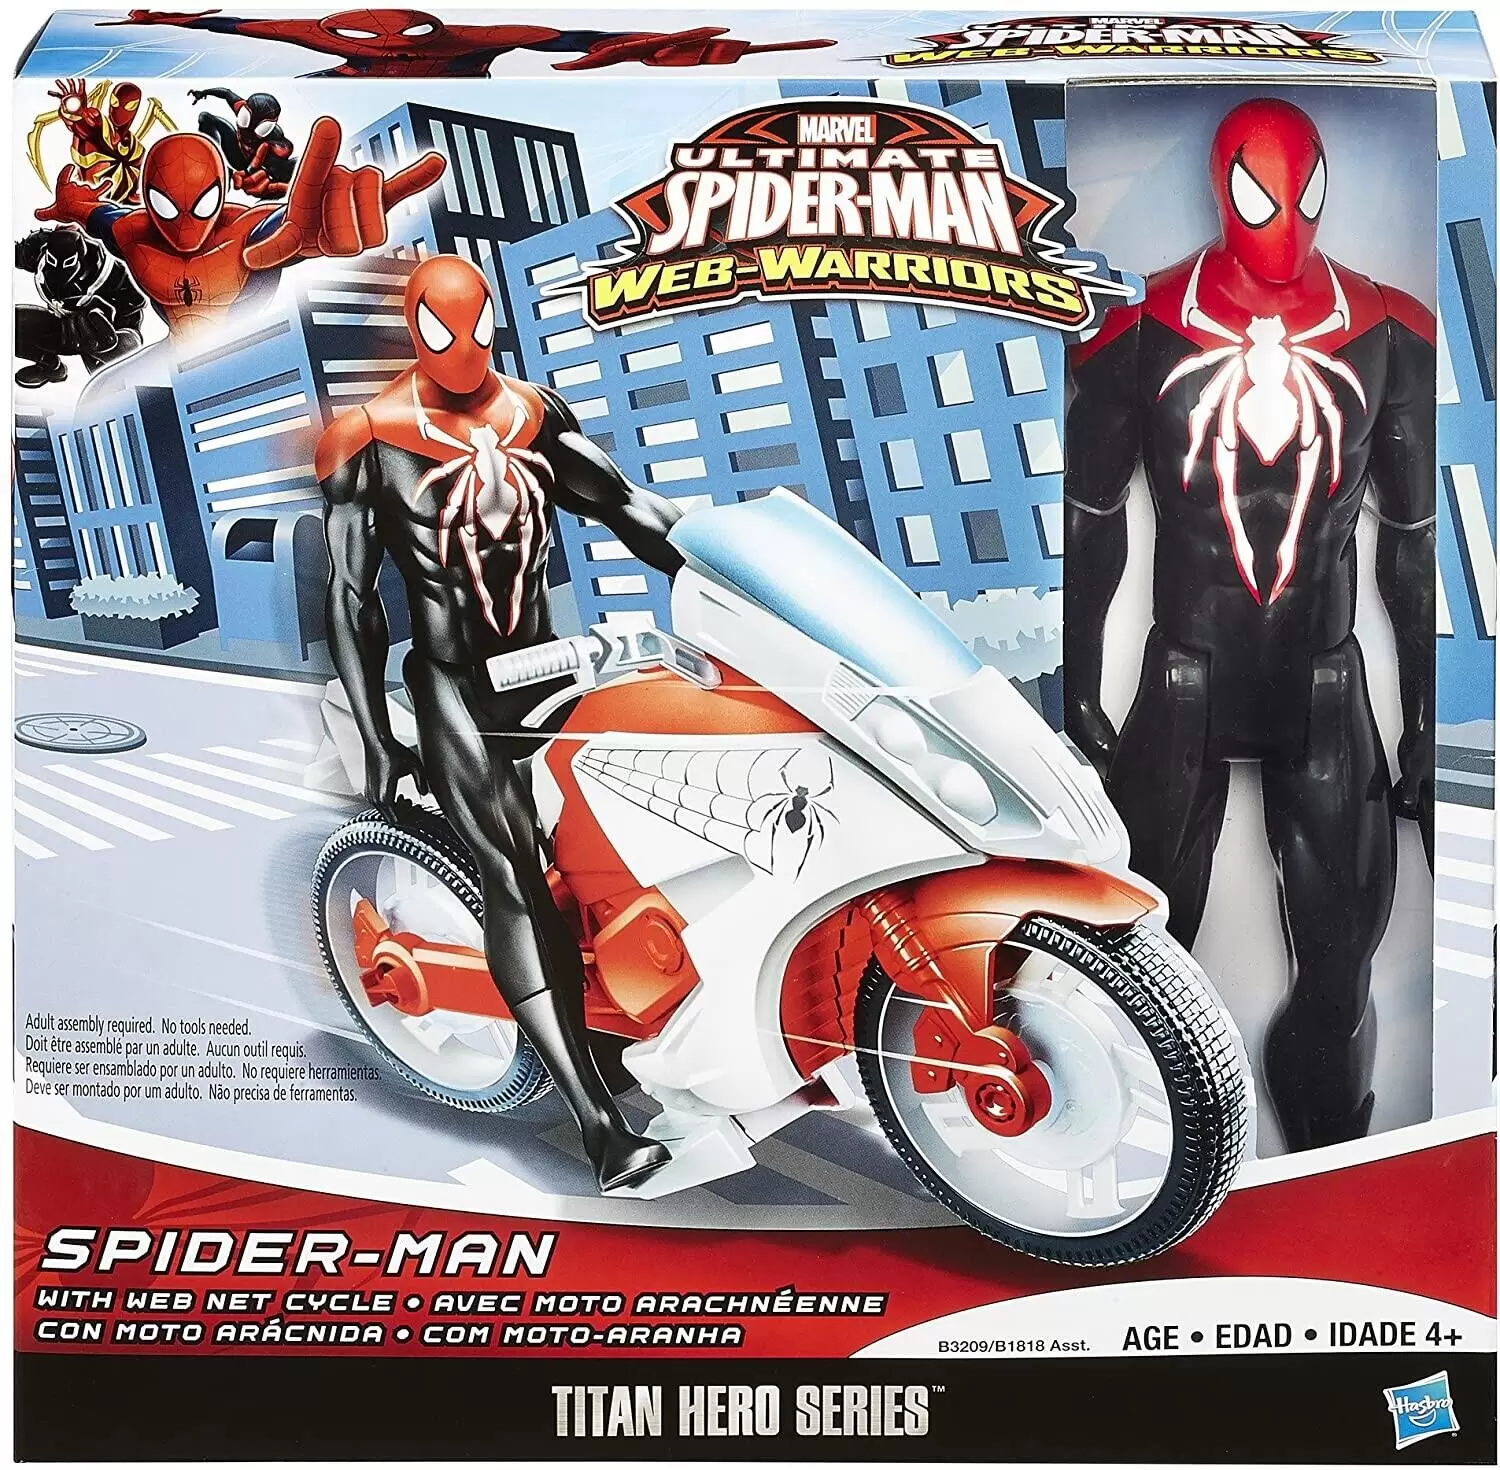 Titan Hero Series - Spider-Man with Web Net Cycle